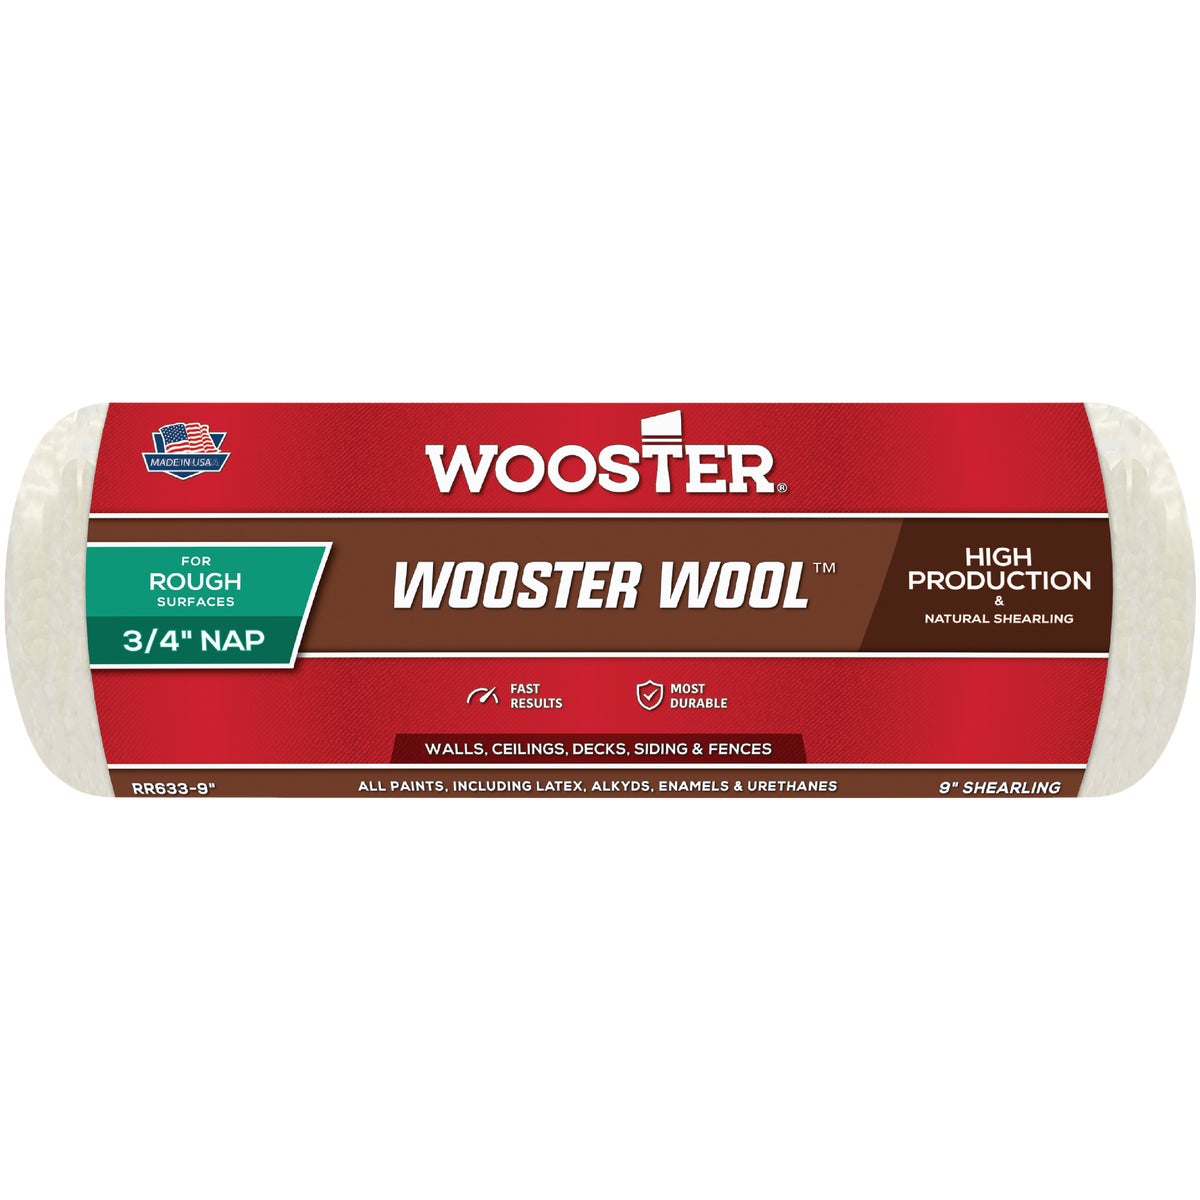 Wooster Wool 9 In. x 3/4 In. Paint Roller Cover